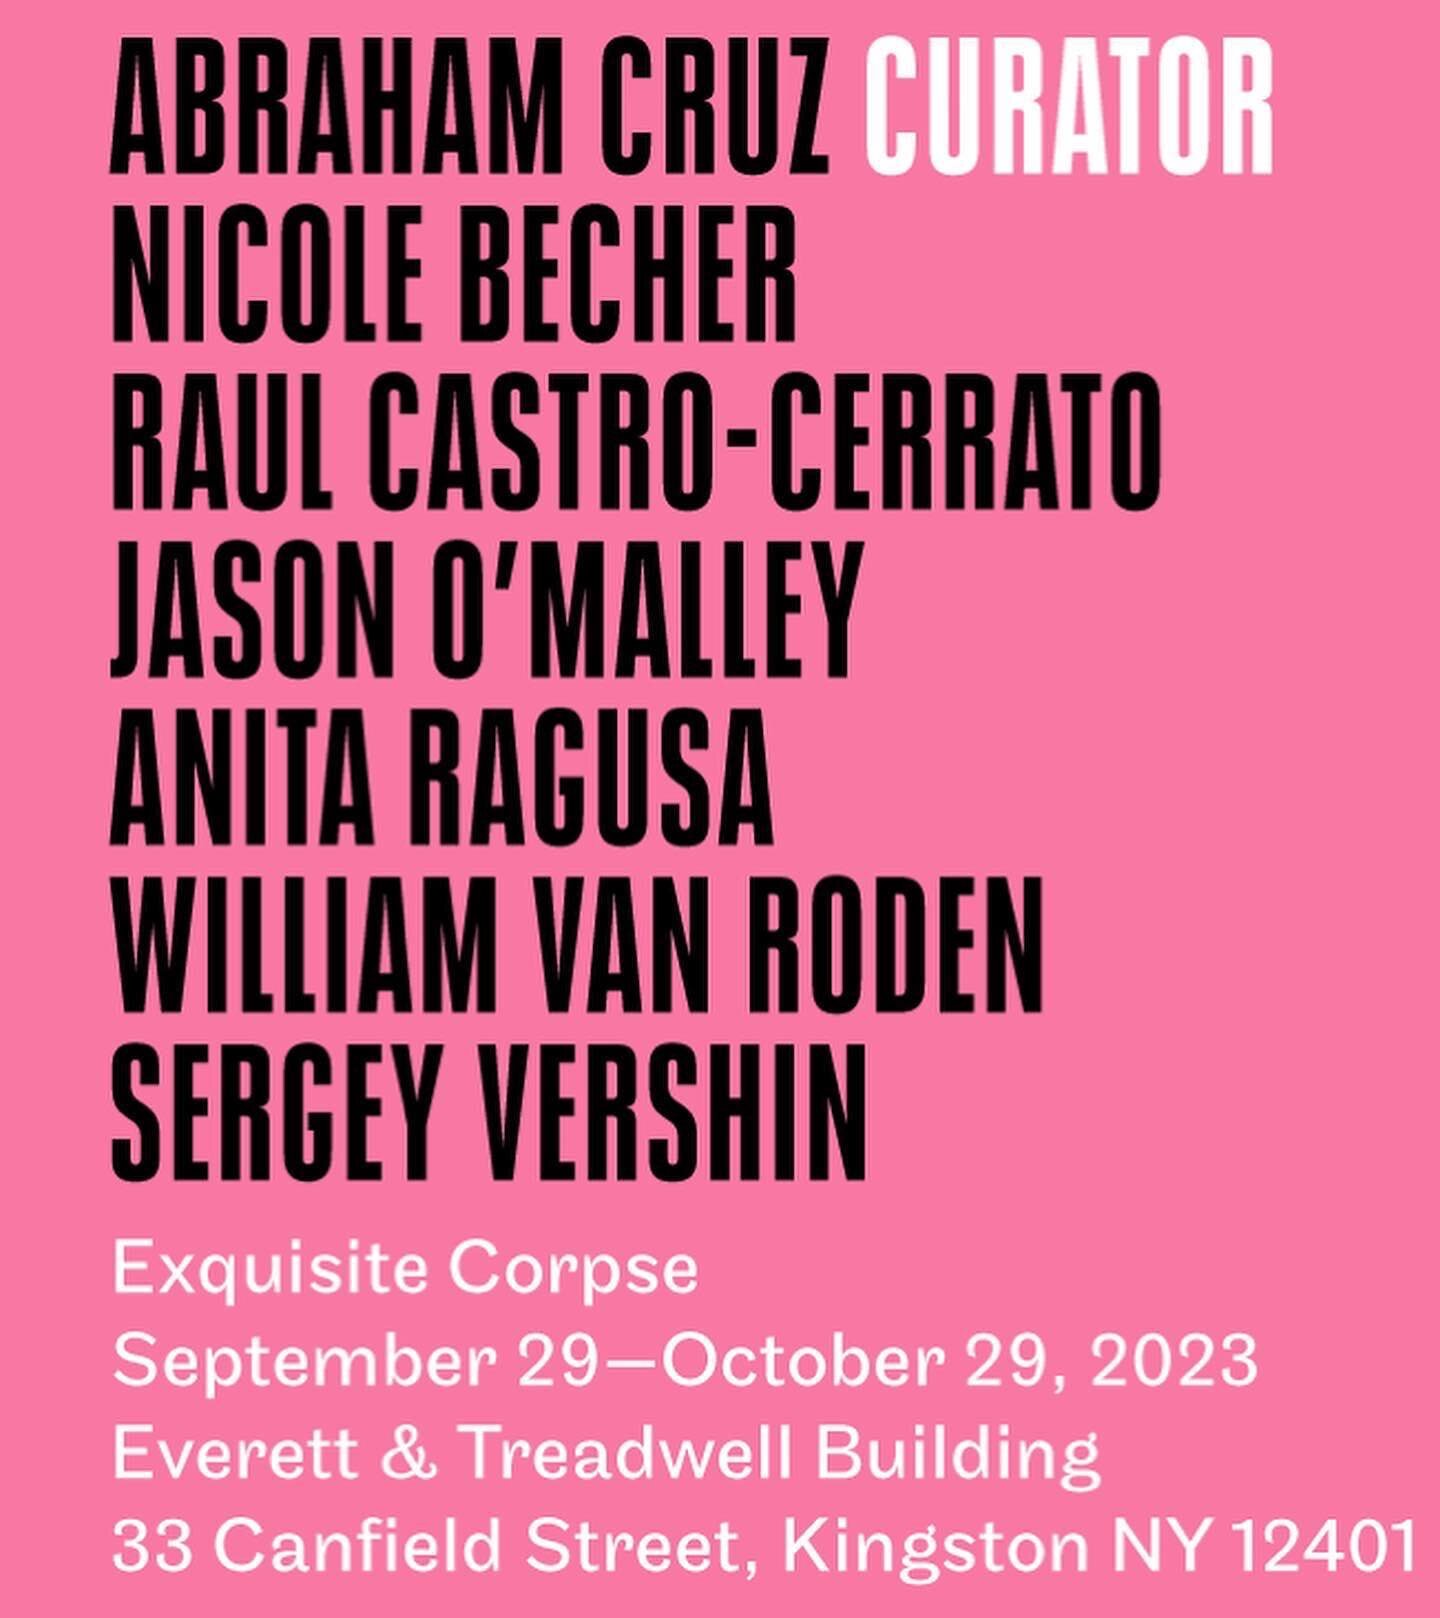 Exquisite Corpse 2023
September 29&mdash;October 29, 2023 

Opening reception:
Friday, September 29, 5-9 pm